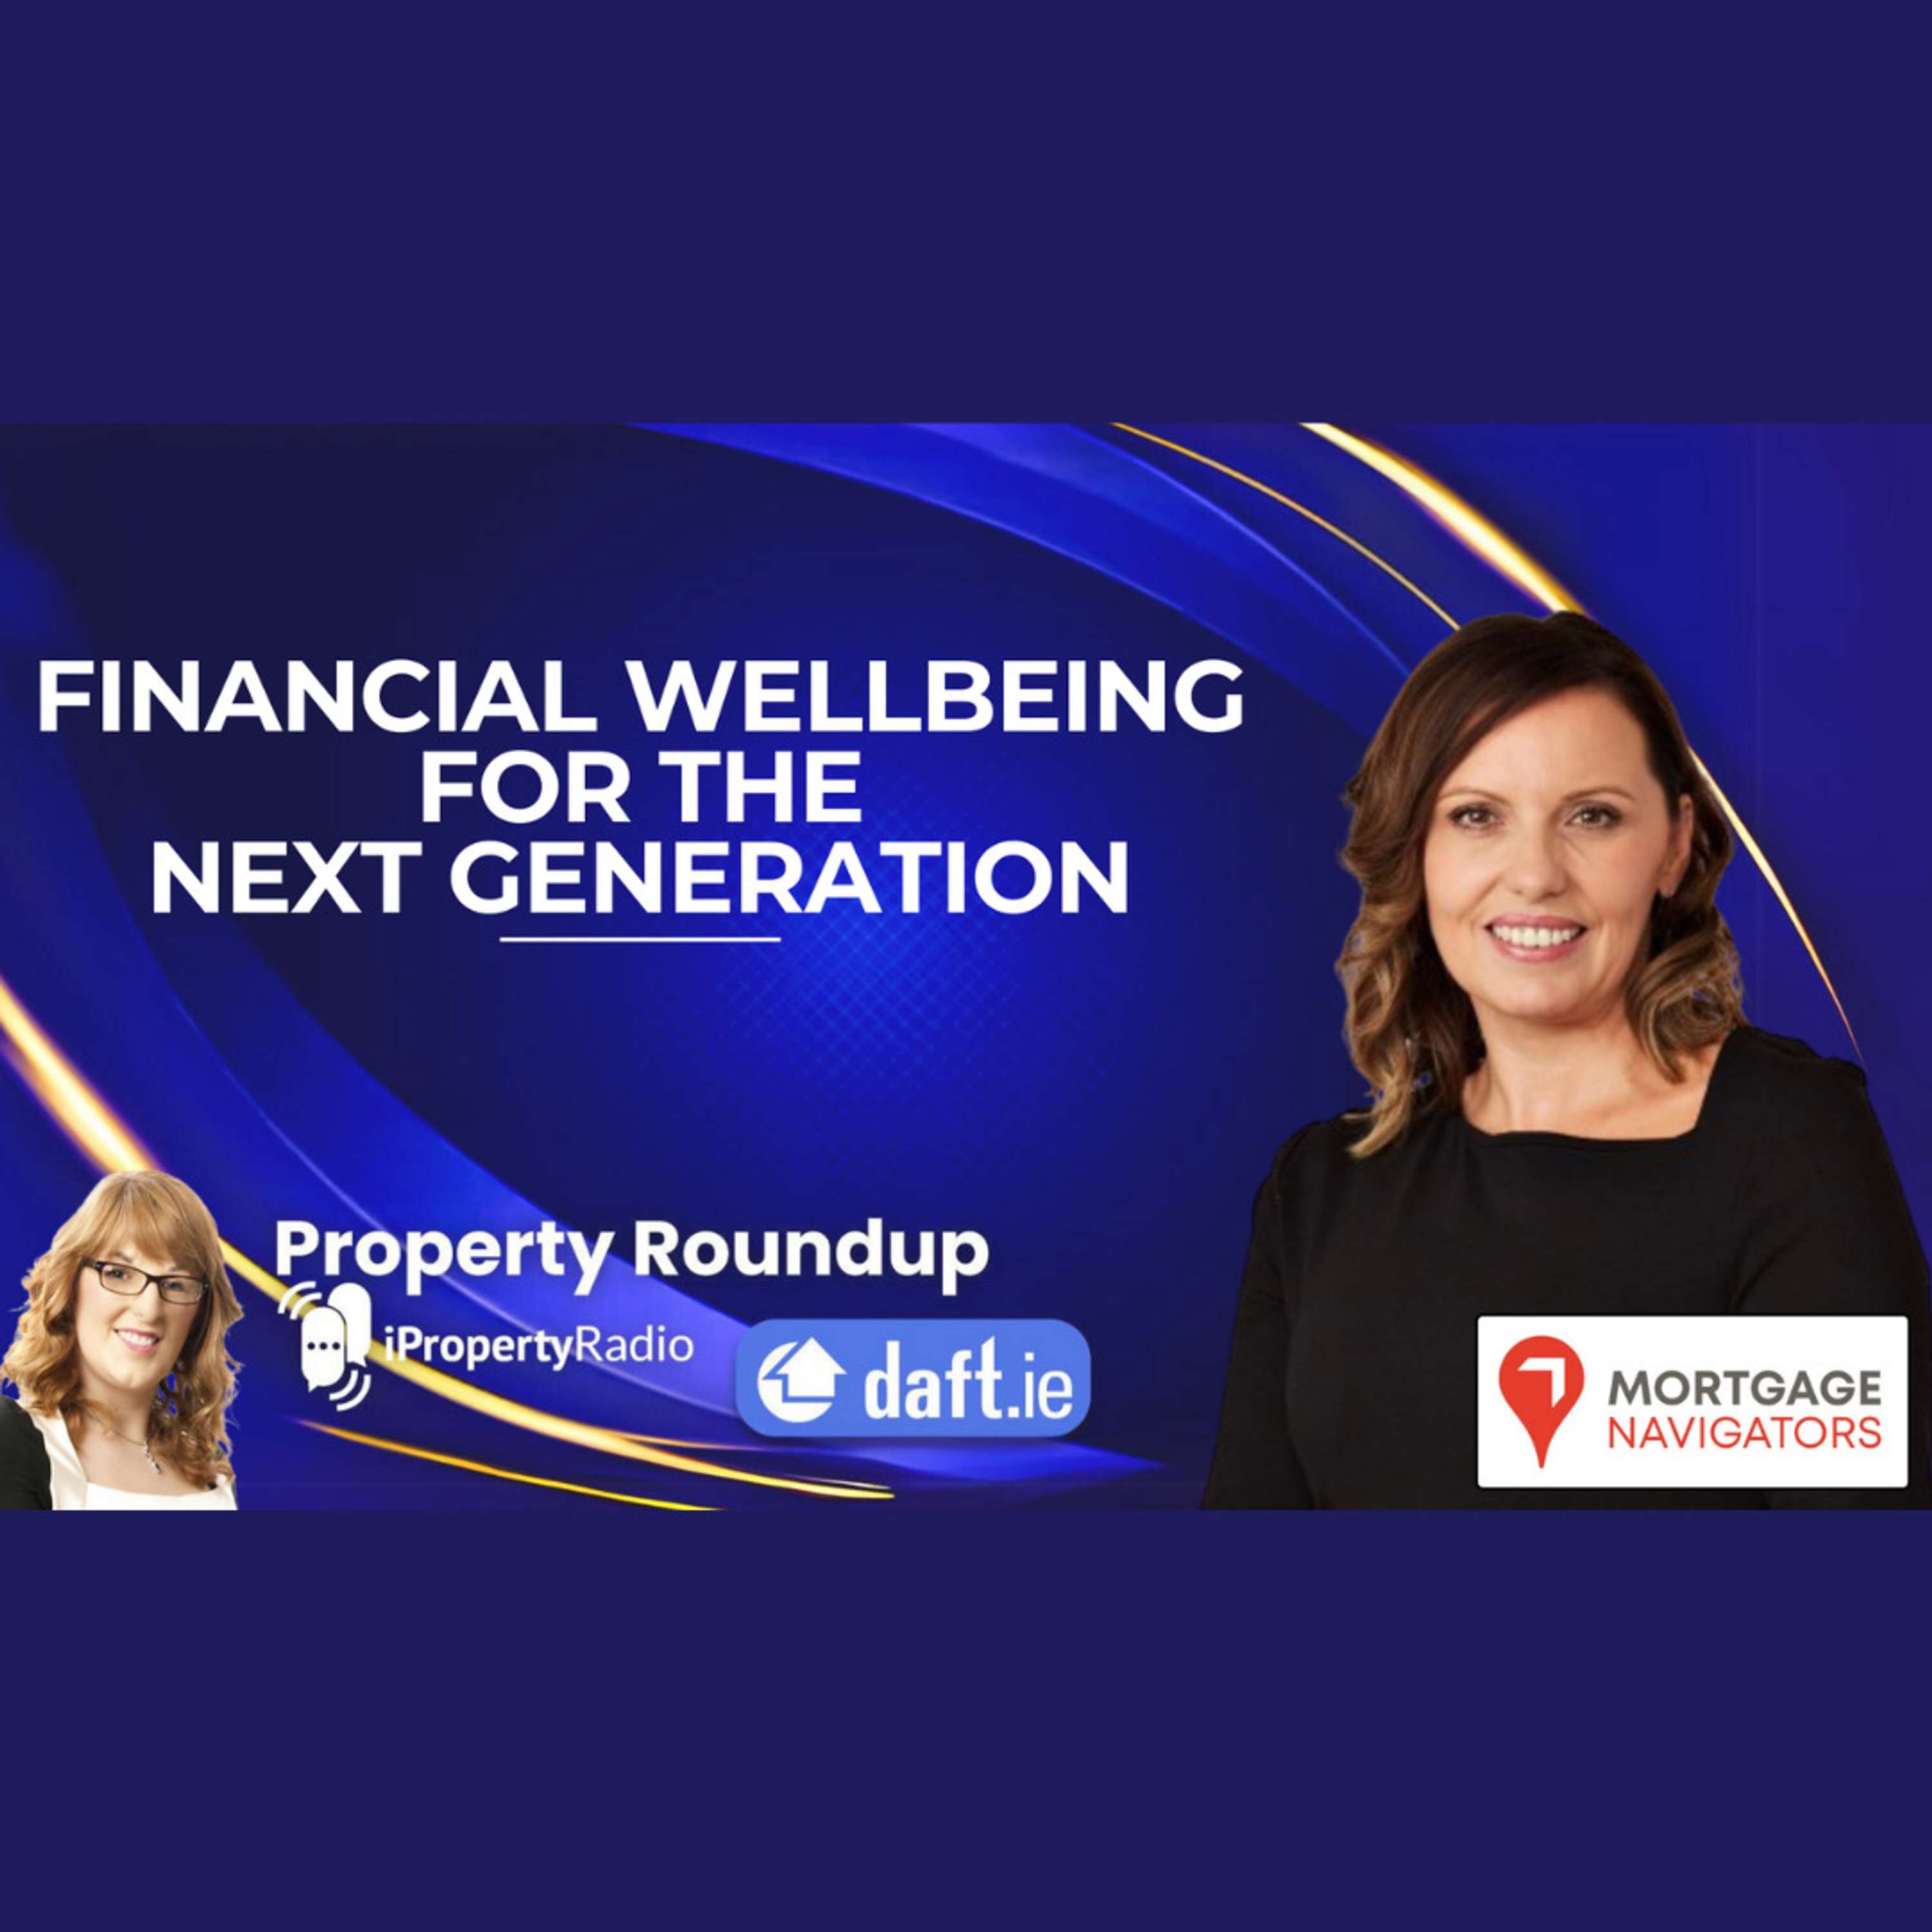 Financial wellbeing for the next generation